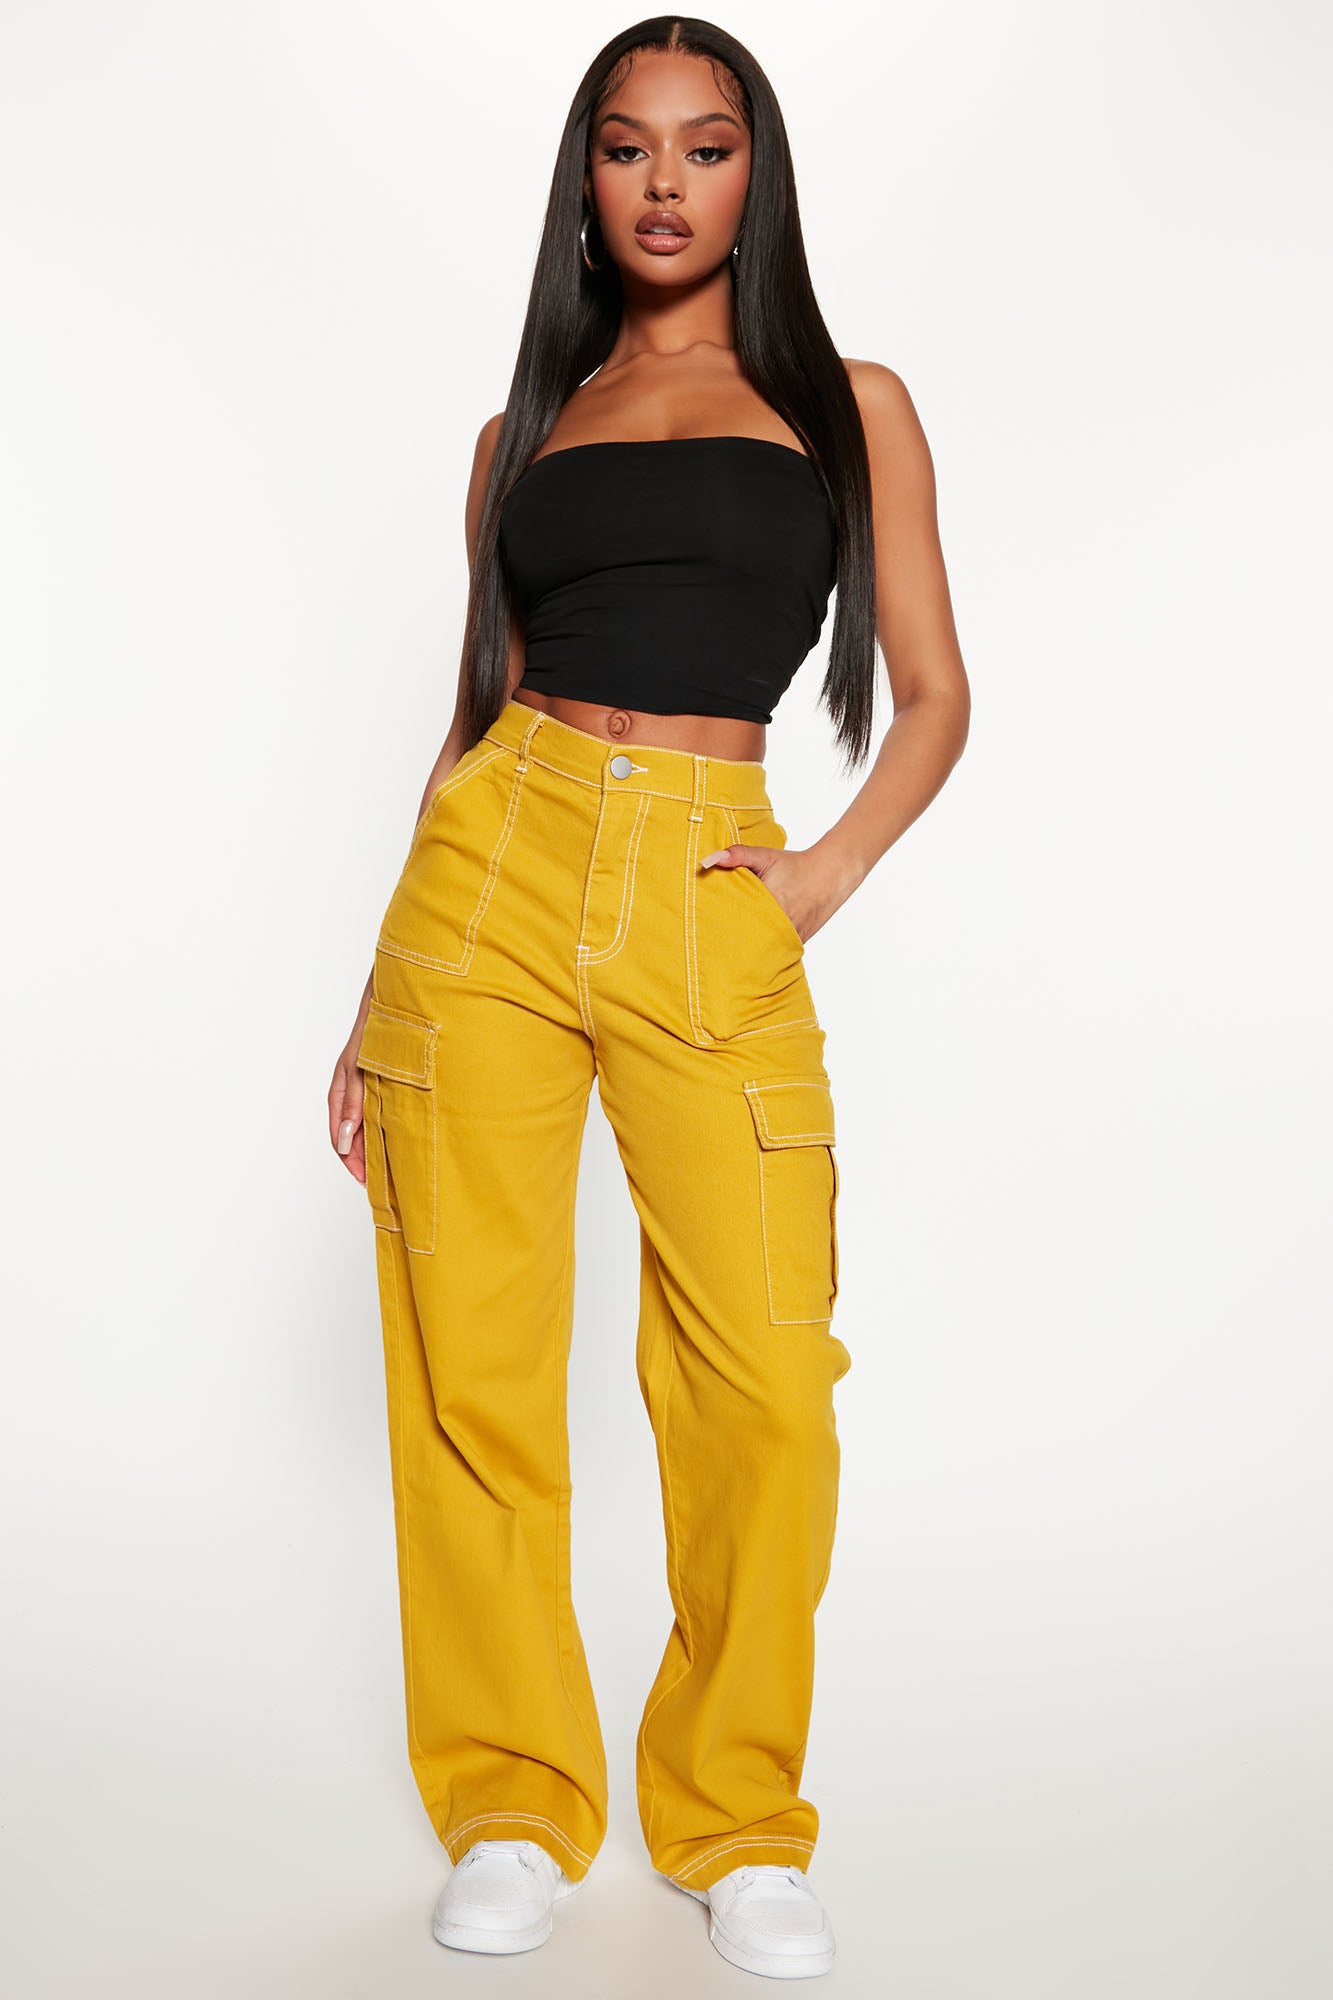 SHEIN Neon Yellow Chain Detail Belted Cargo Pants  Cargo pants women  Bottom clothes Fashion bottoms